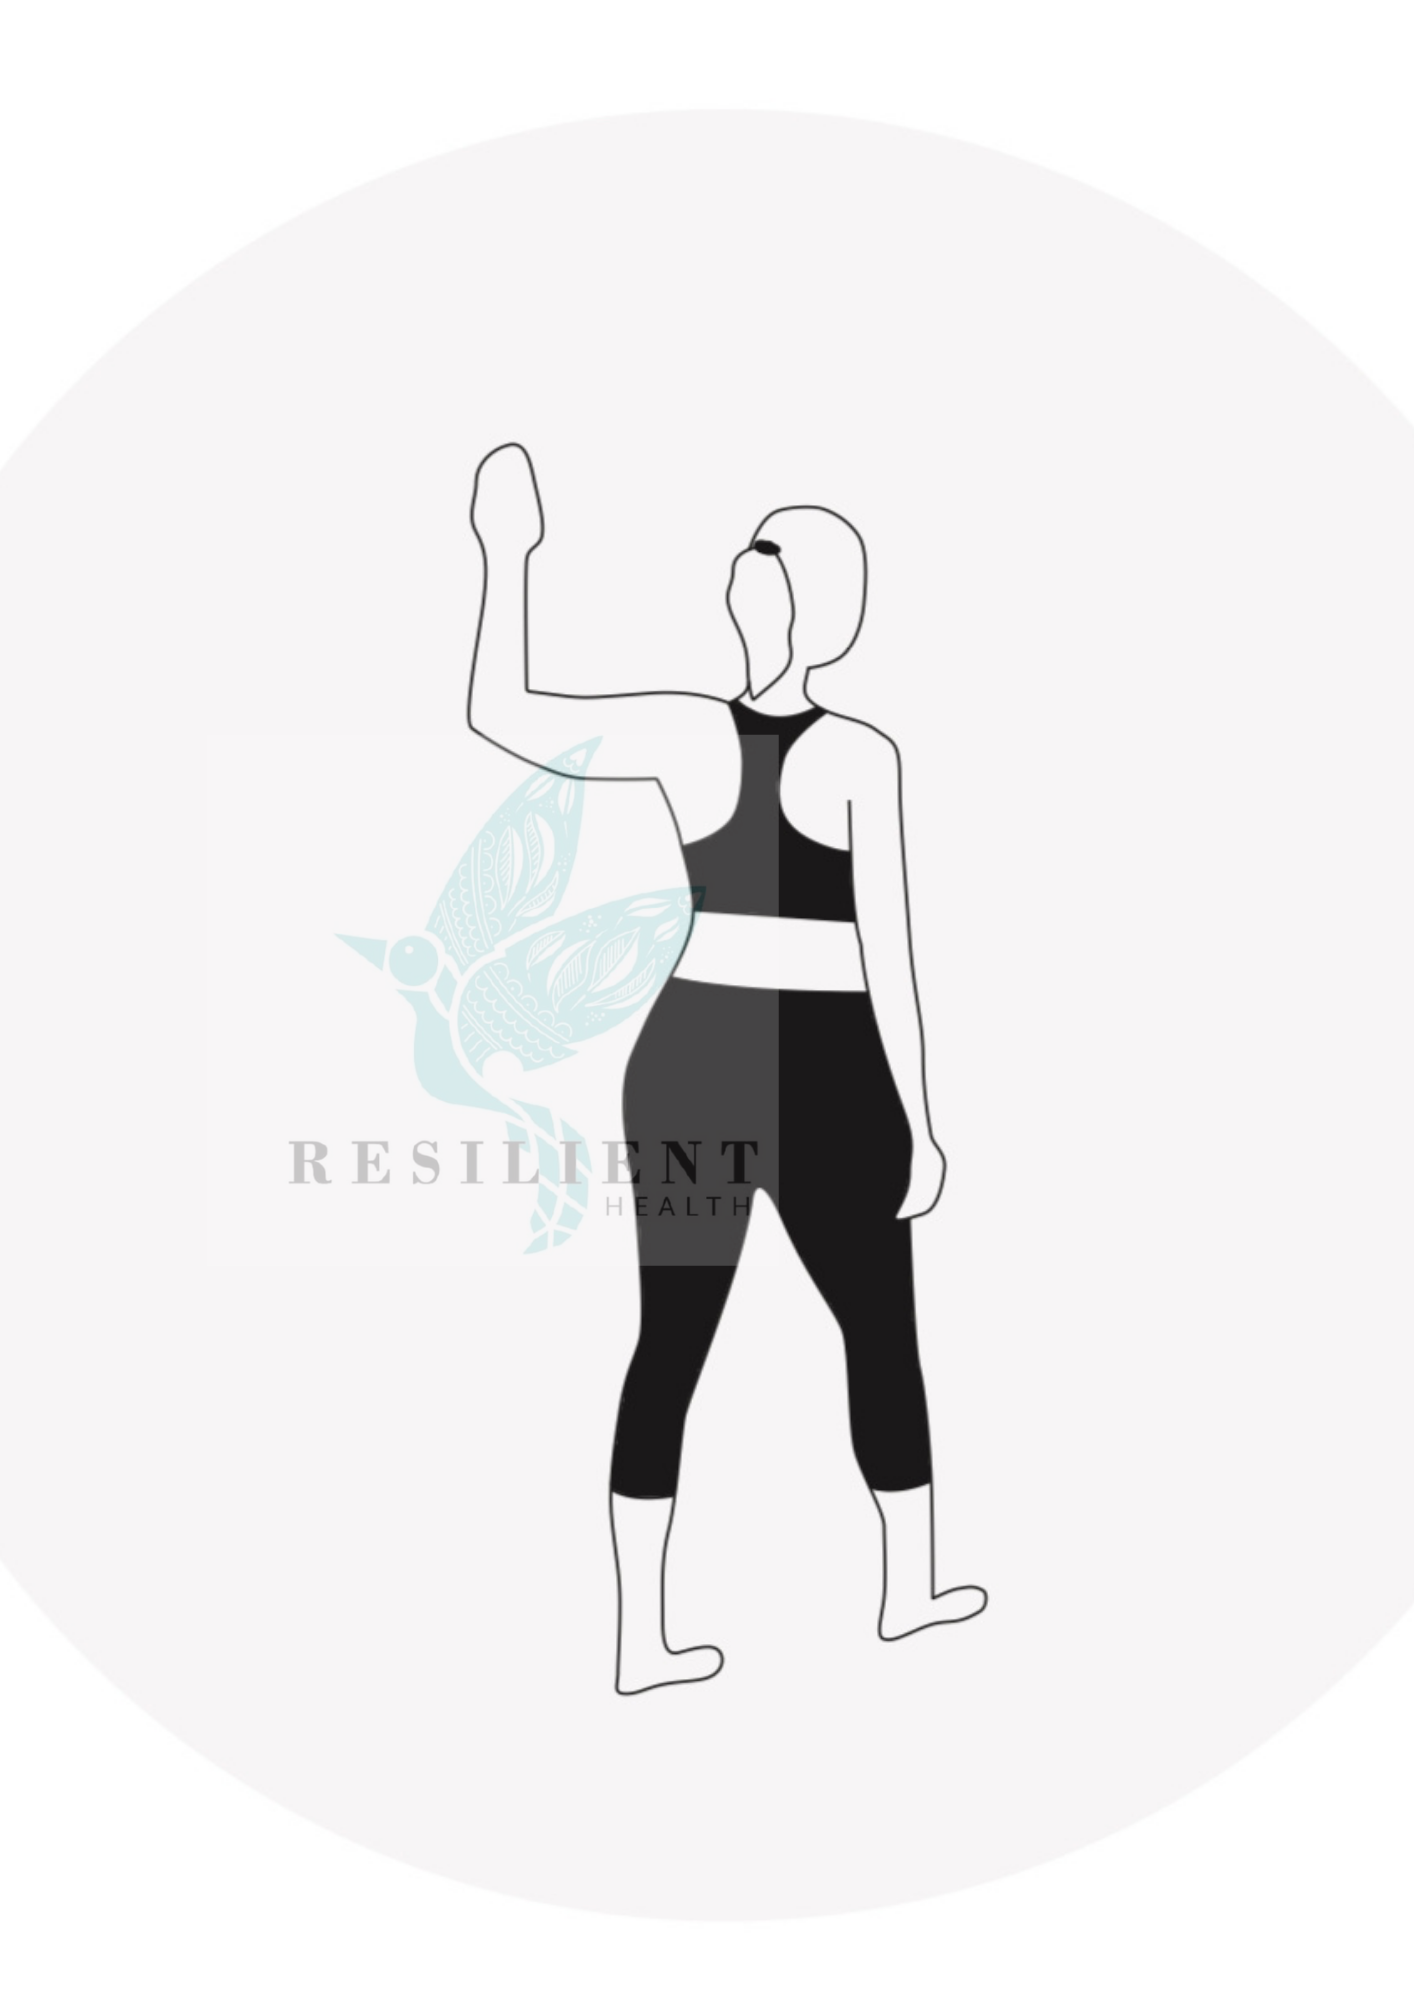 pec stretch-osteopathy_resilient_health_chiropractic_pec_stretch.PNG